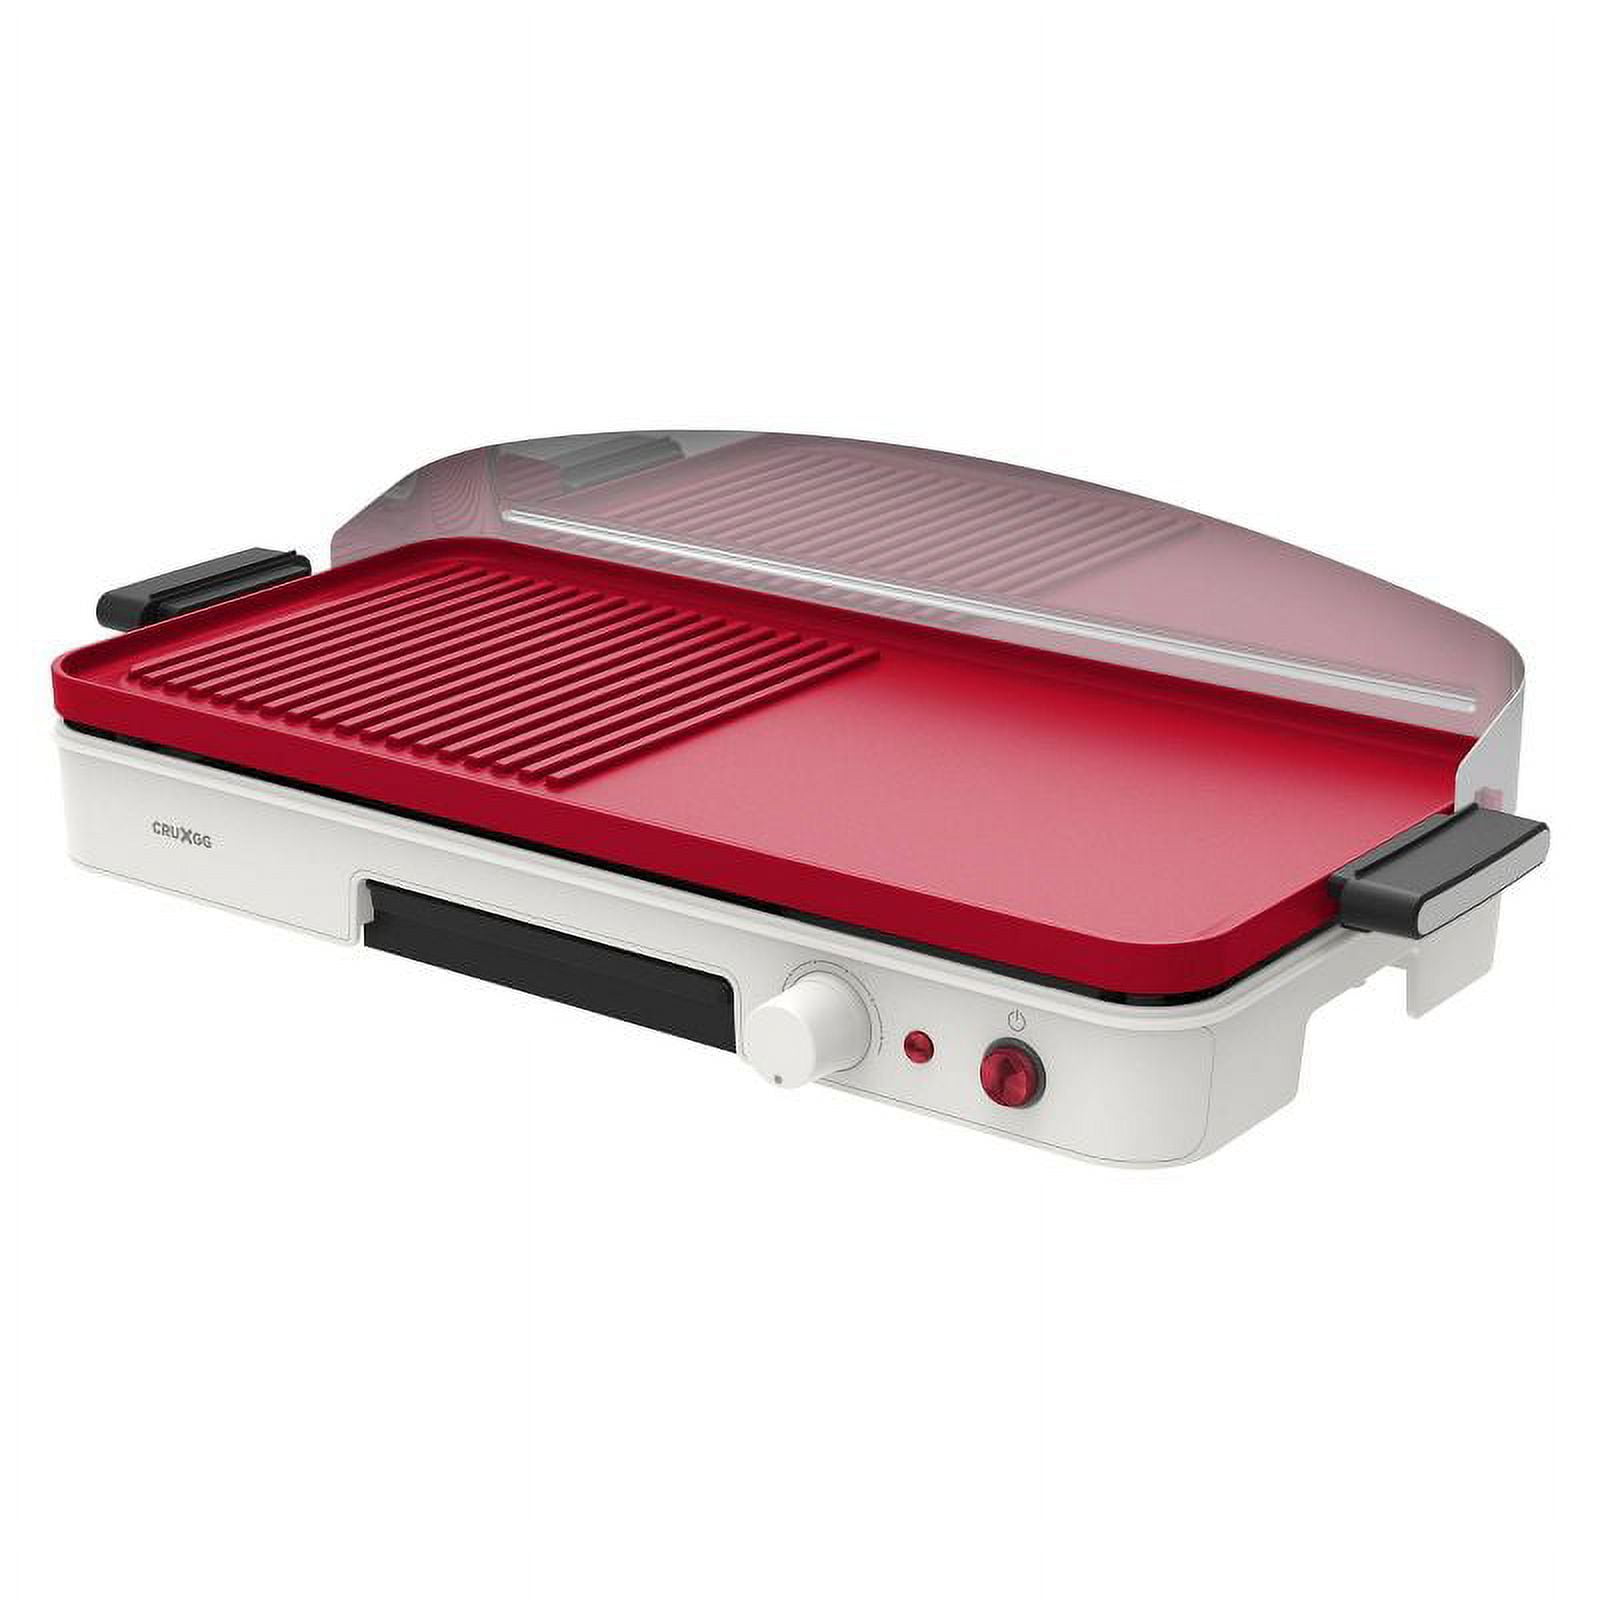 CRUXGG 500°F Extra Large Ceramic Nonstick Searing Grill & Griddle Smoke Gray,072-04-0336